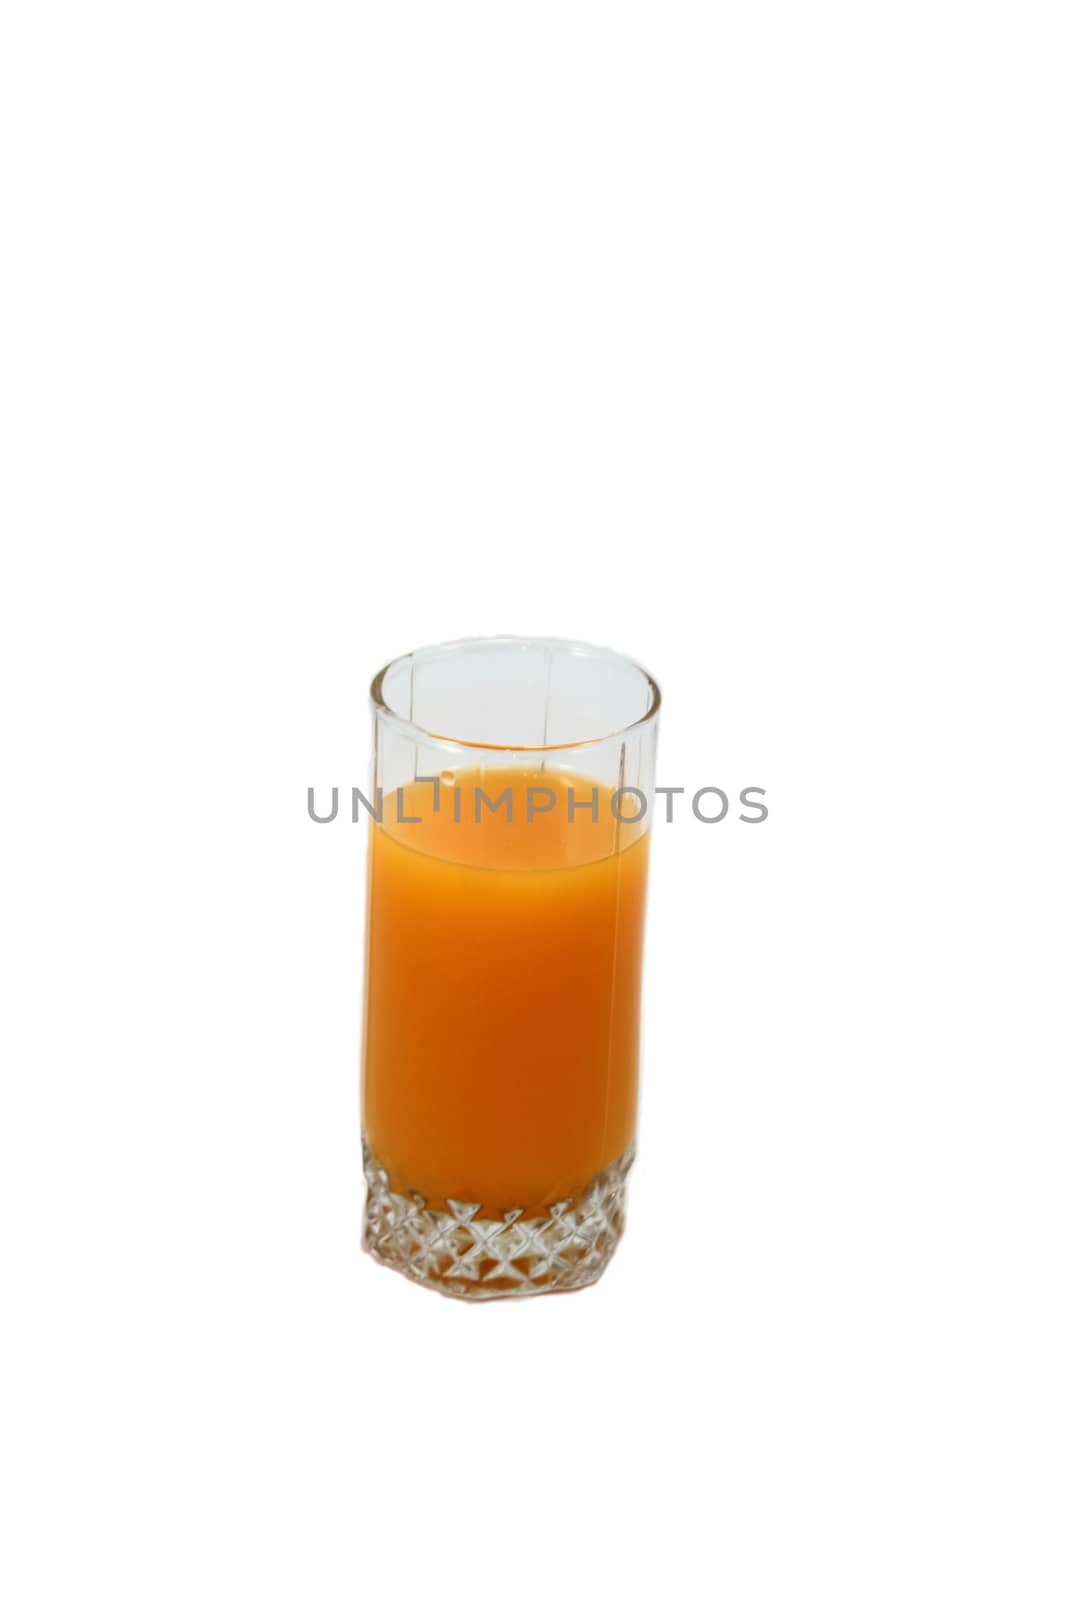 Standing on a white background glass of orange juice